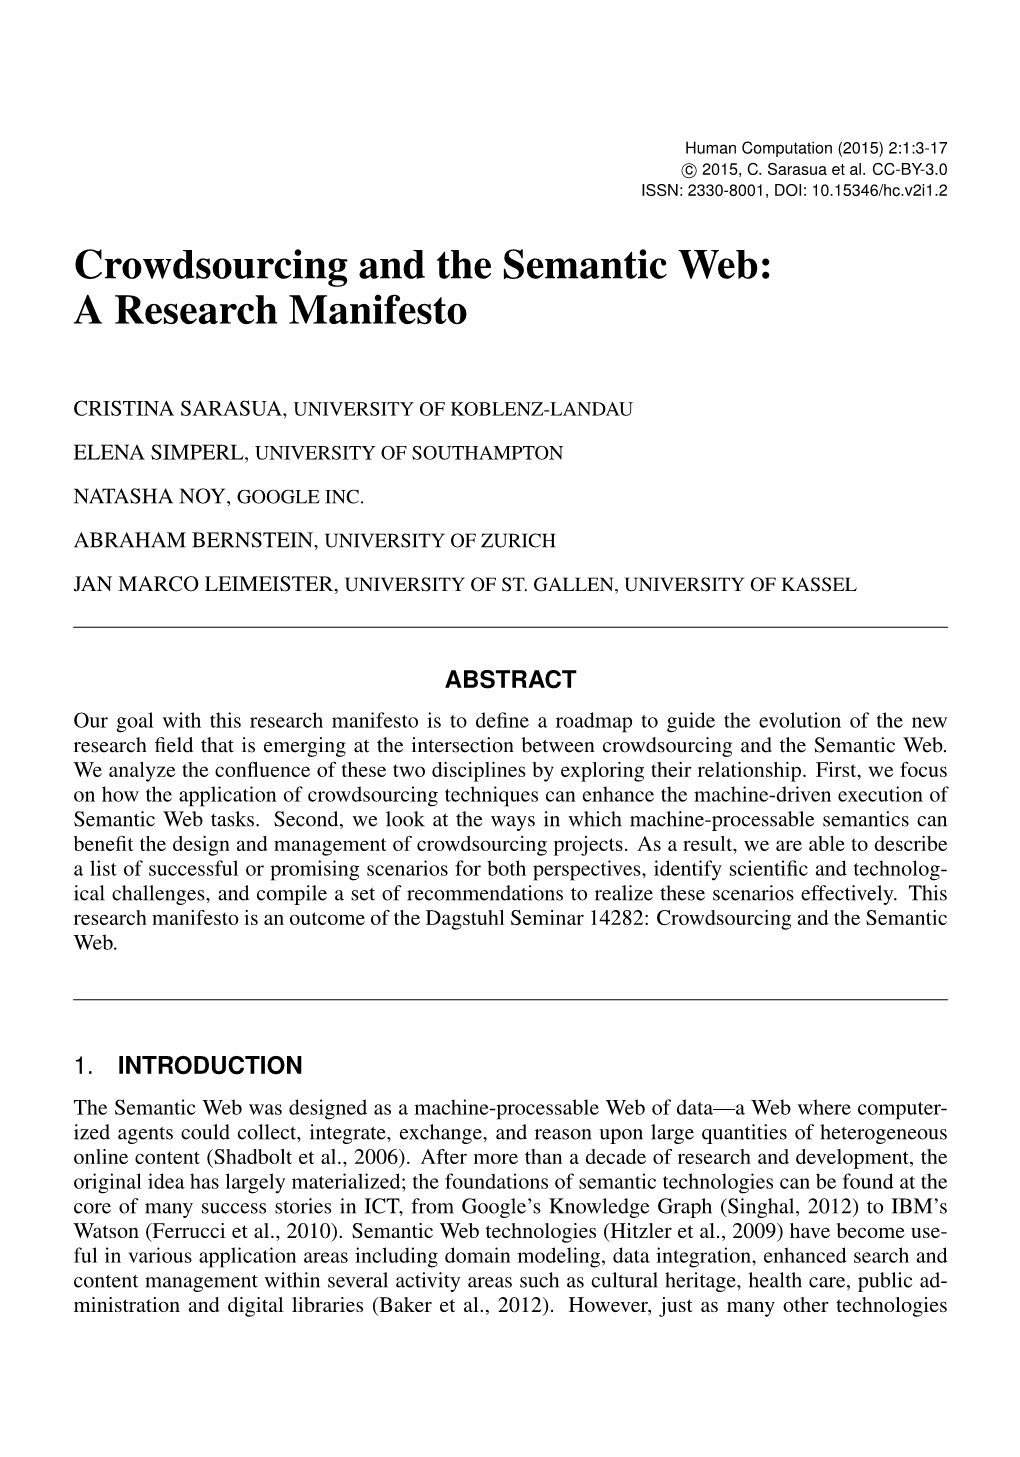 Crowdsourcing and the Semantic Web: a Research Manifesto